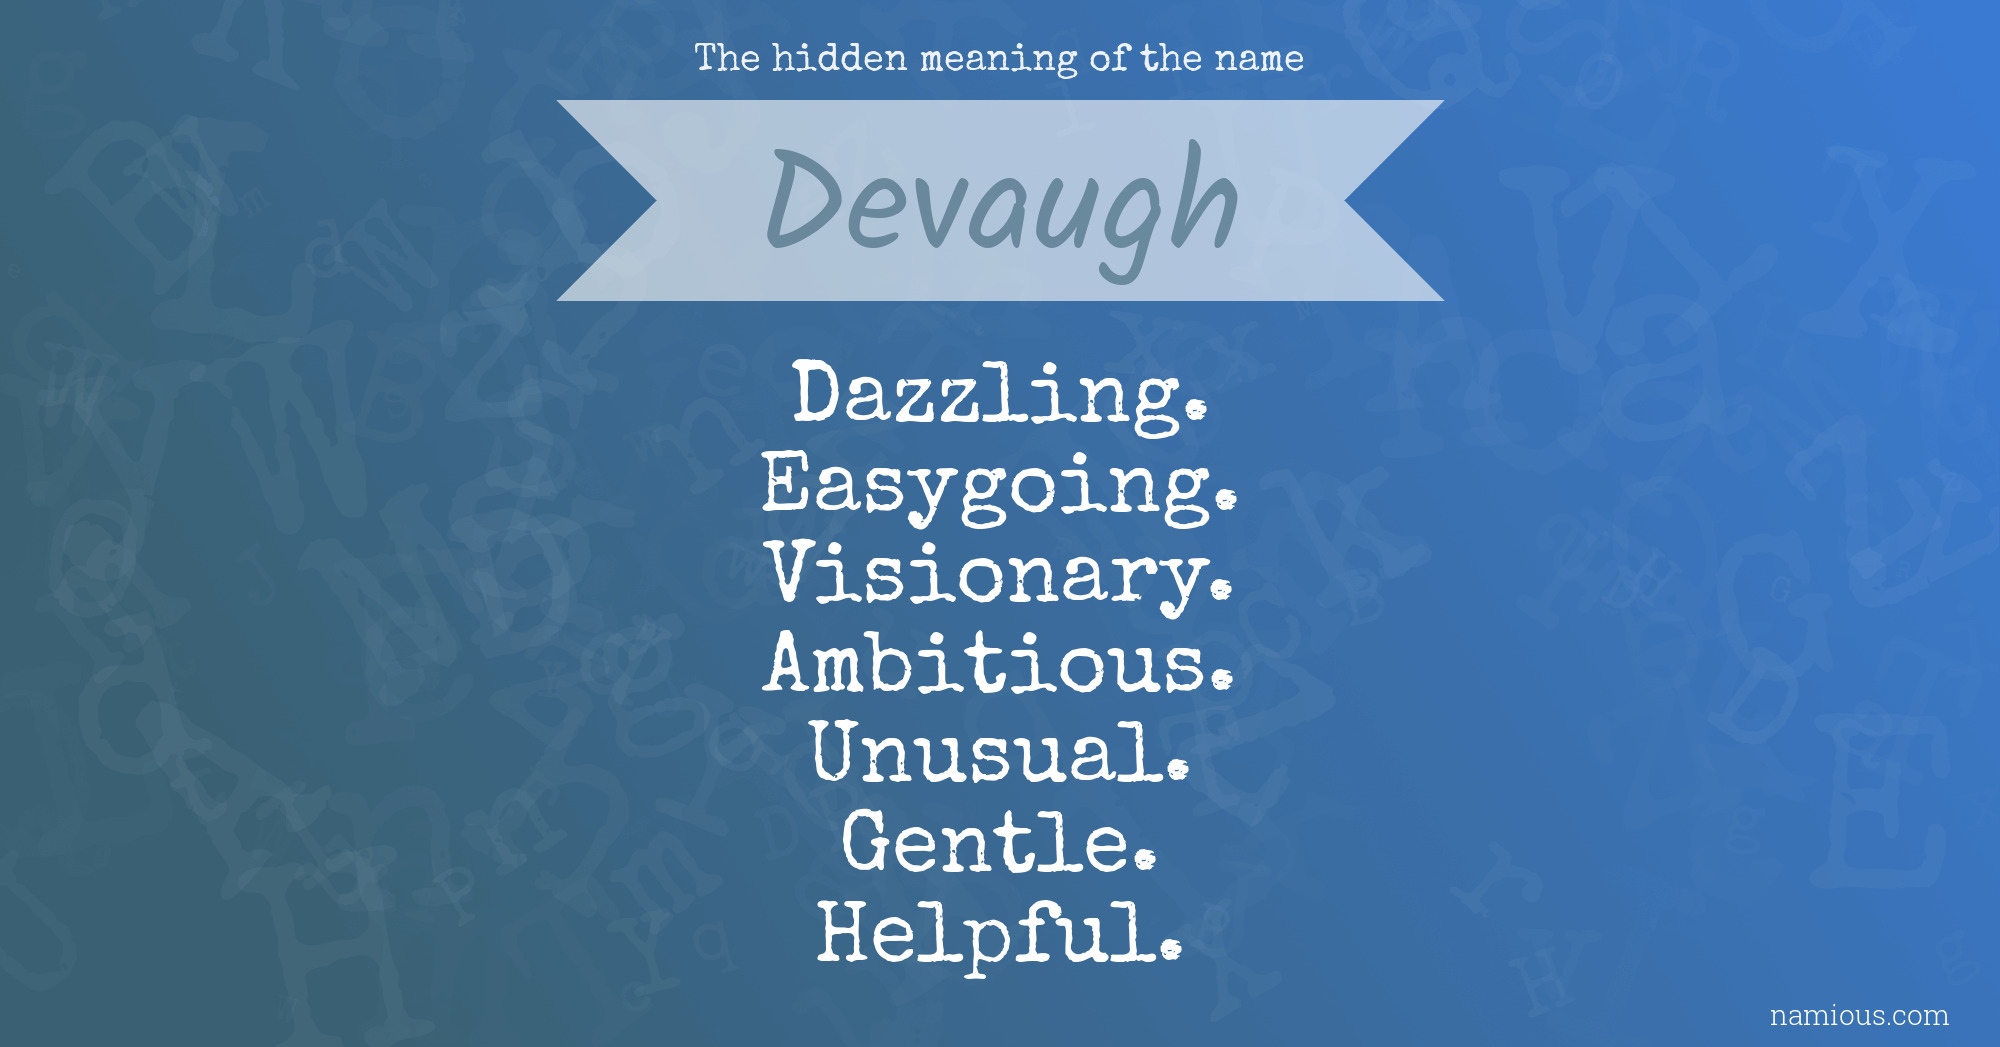 The hidden meaning of the name Devaugh